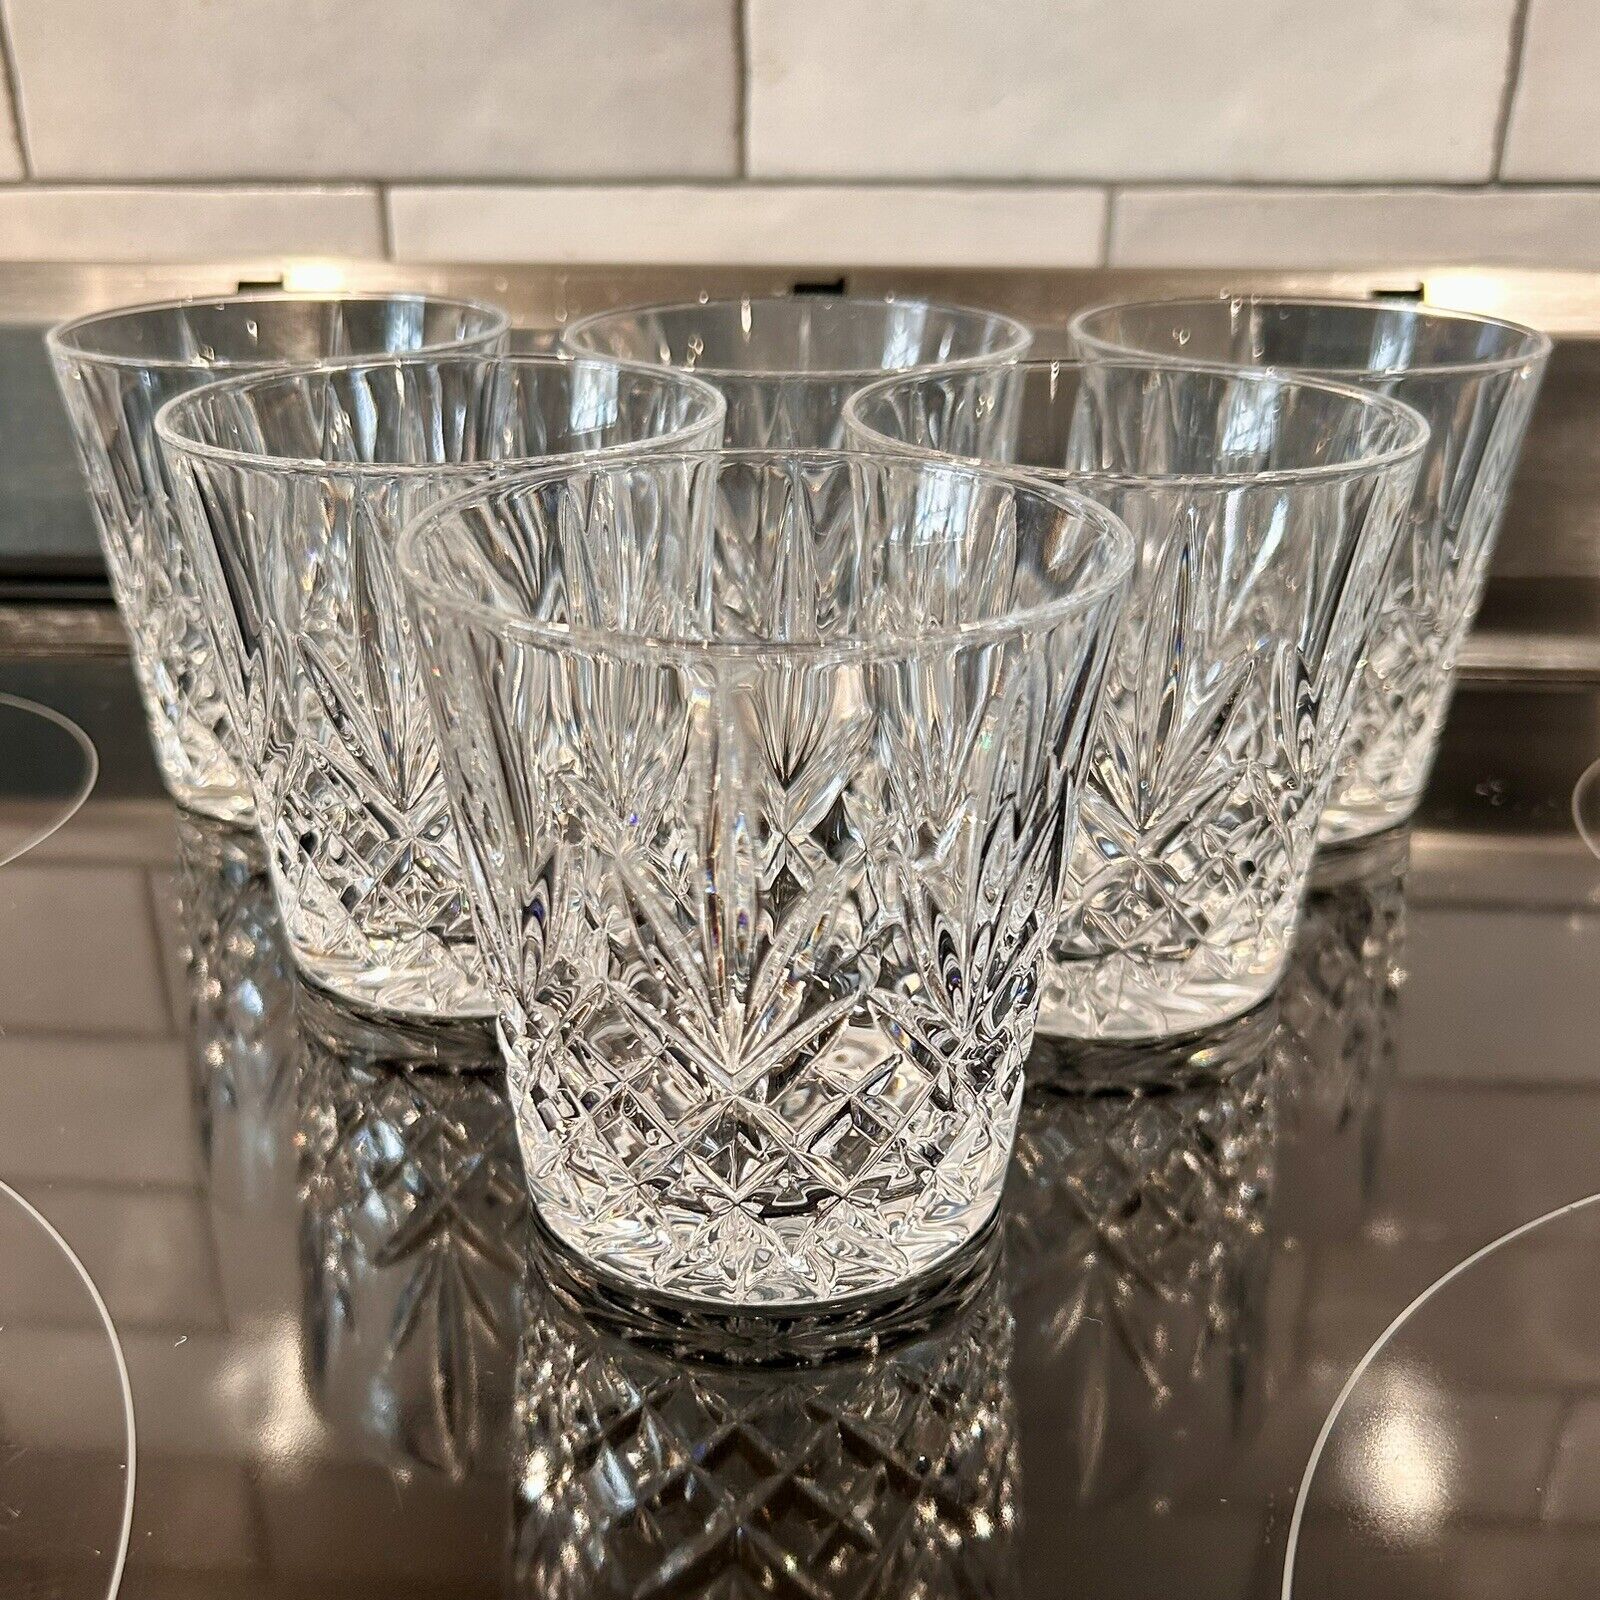 Set of 6 CRISTAL D'ARQUES-DURAND “Provence” Double Old Fashioned Glasses~Mint